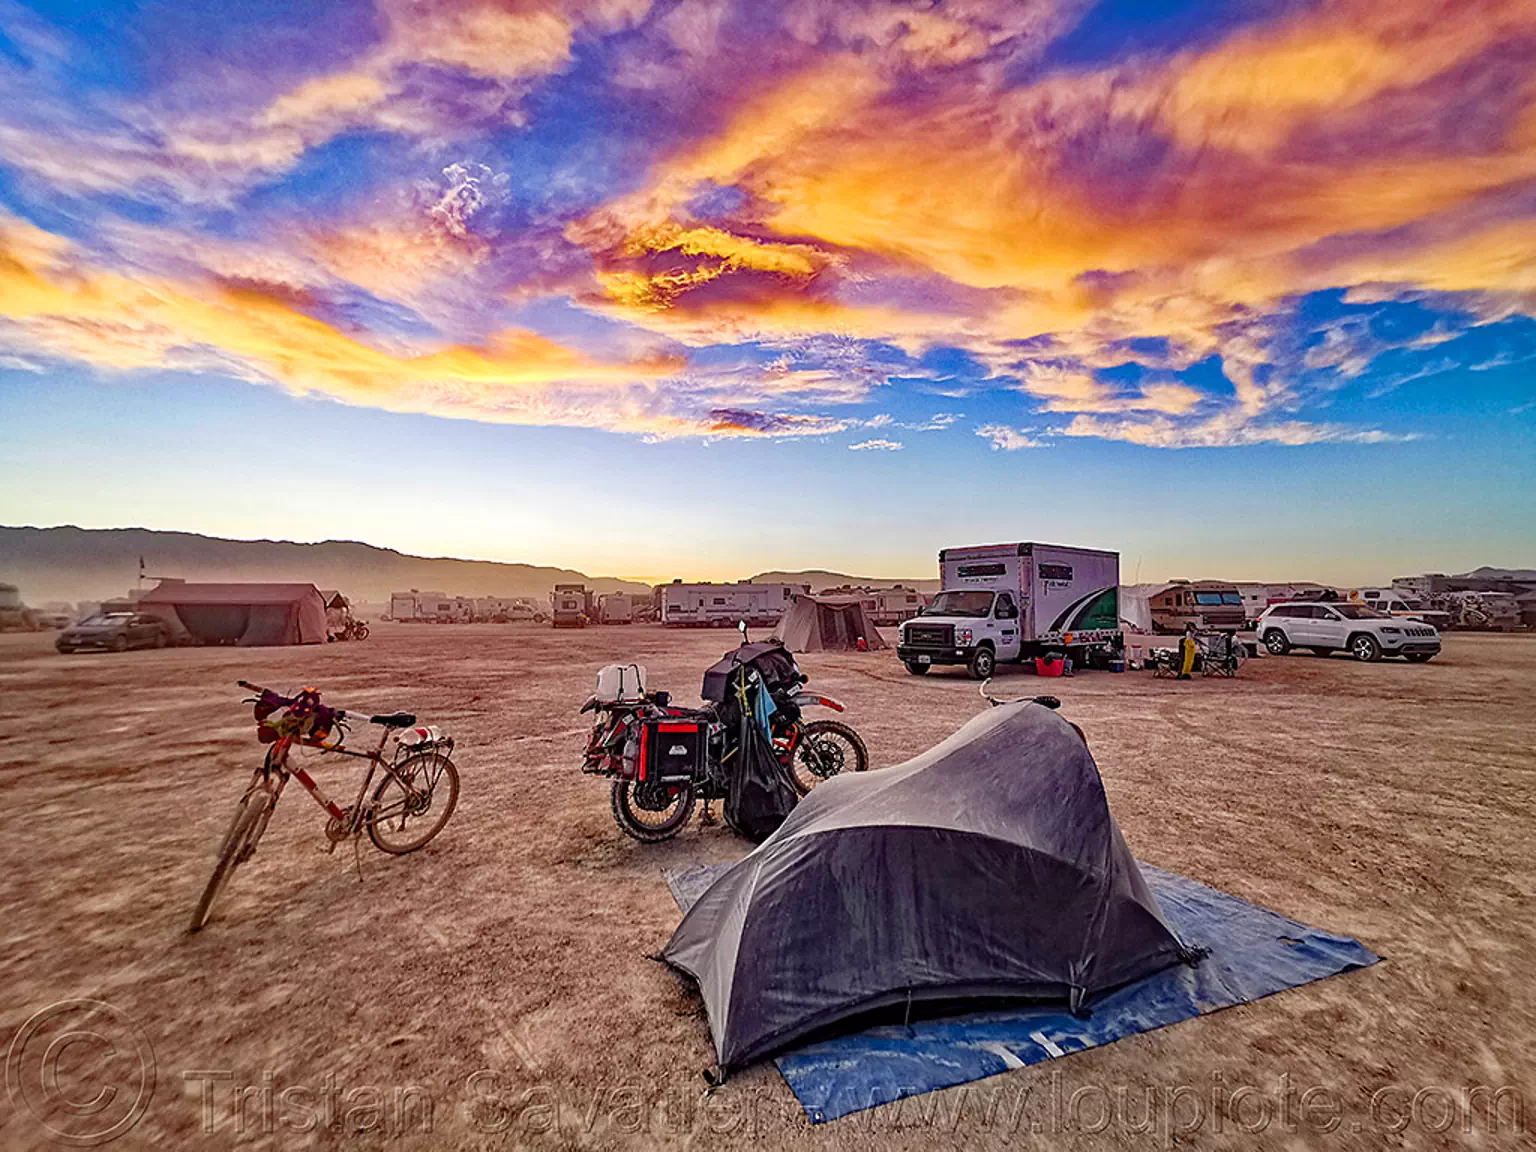 my small camp at sunset - burning man 2019, bicycle, burning man, camp, clouds, glowing, klr 650, motorcycle, sunset sky, sunset skybm, tent